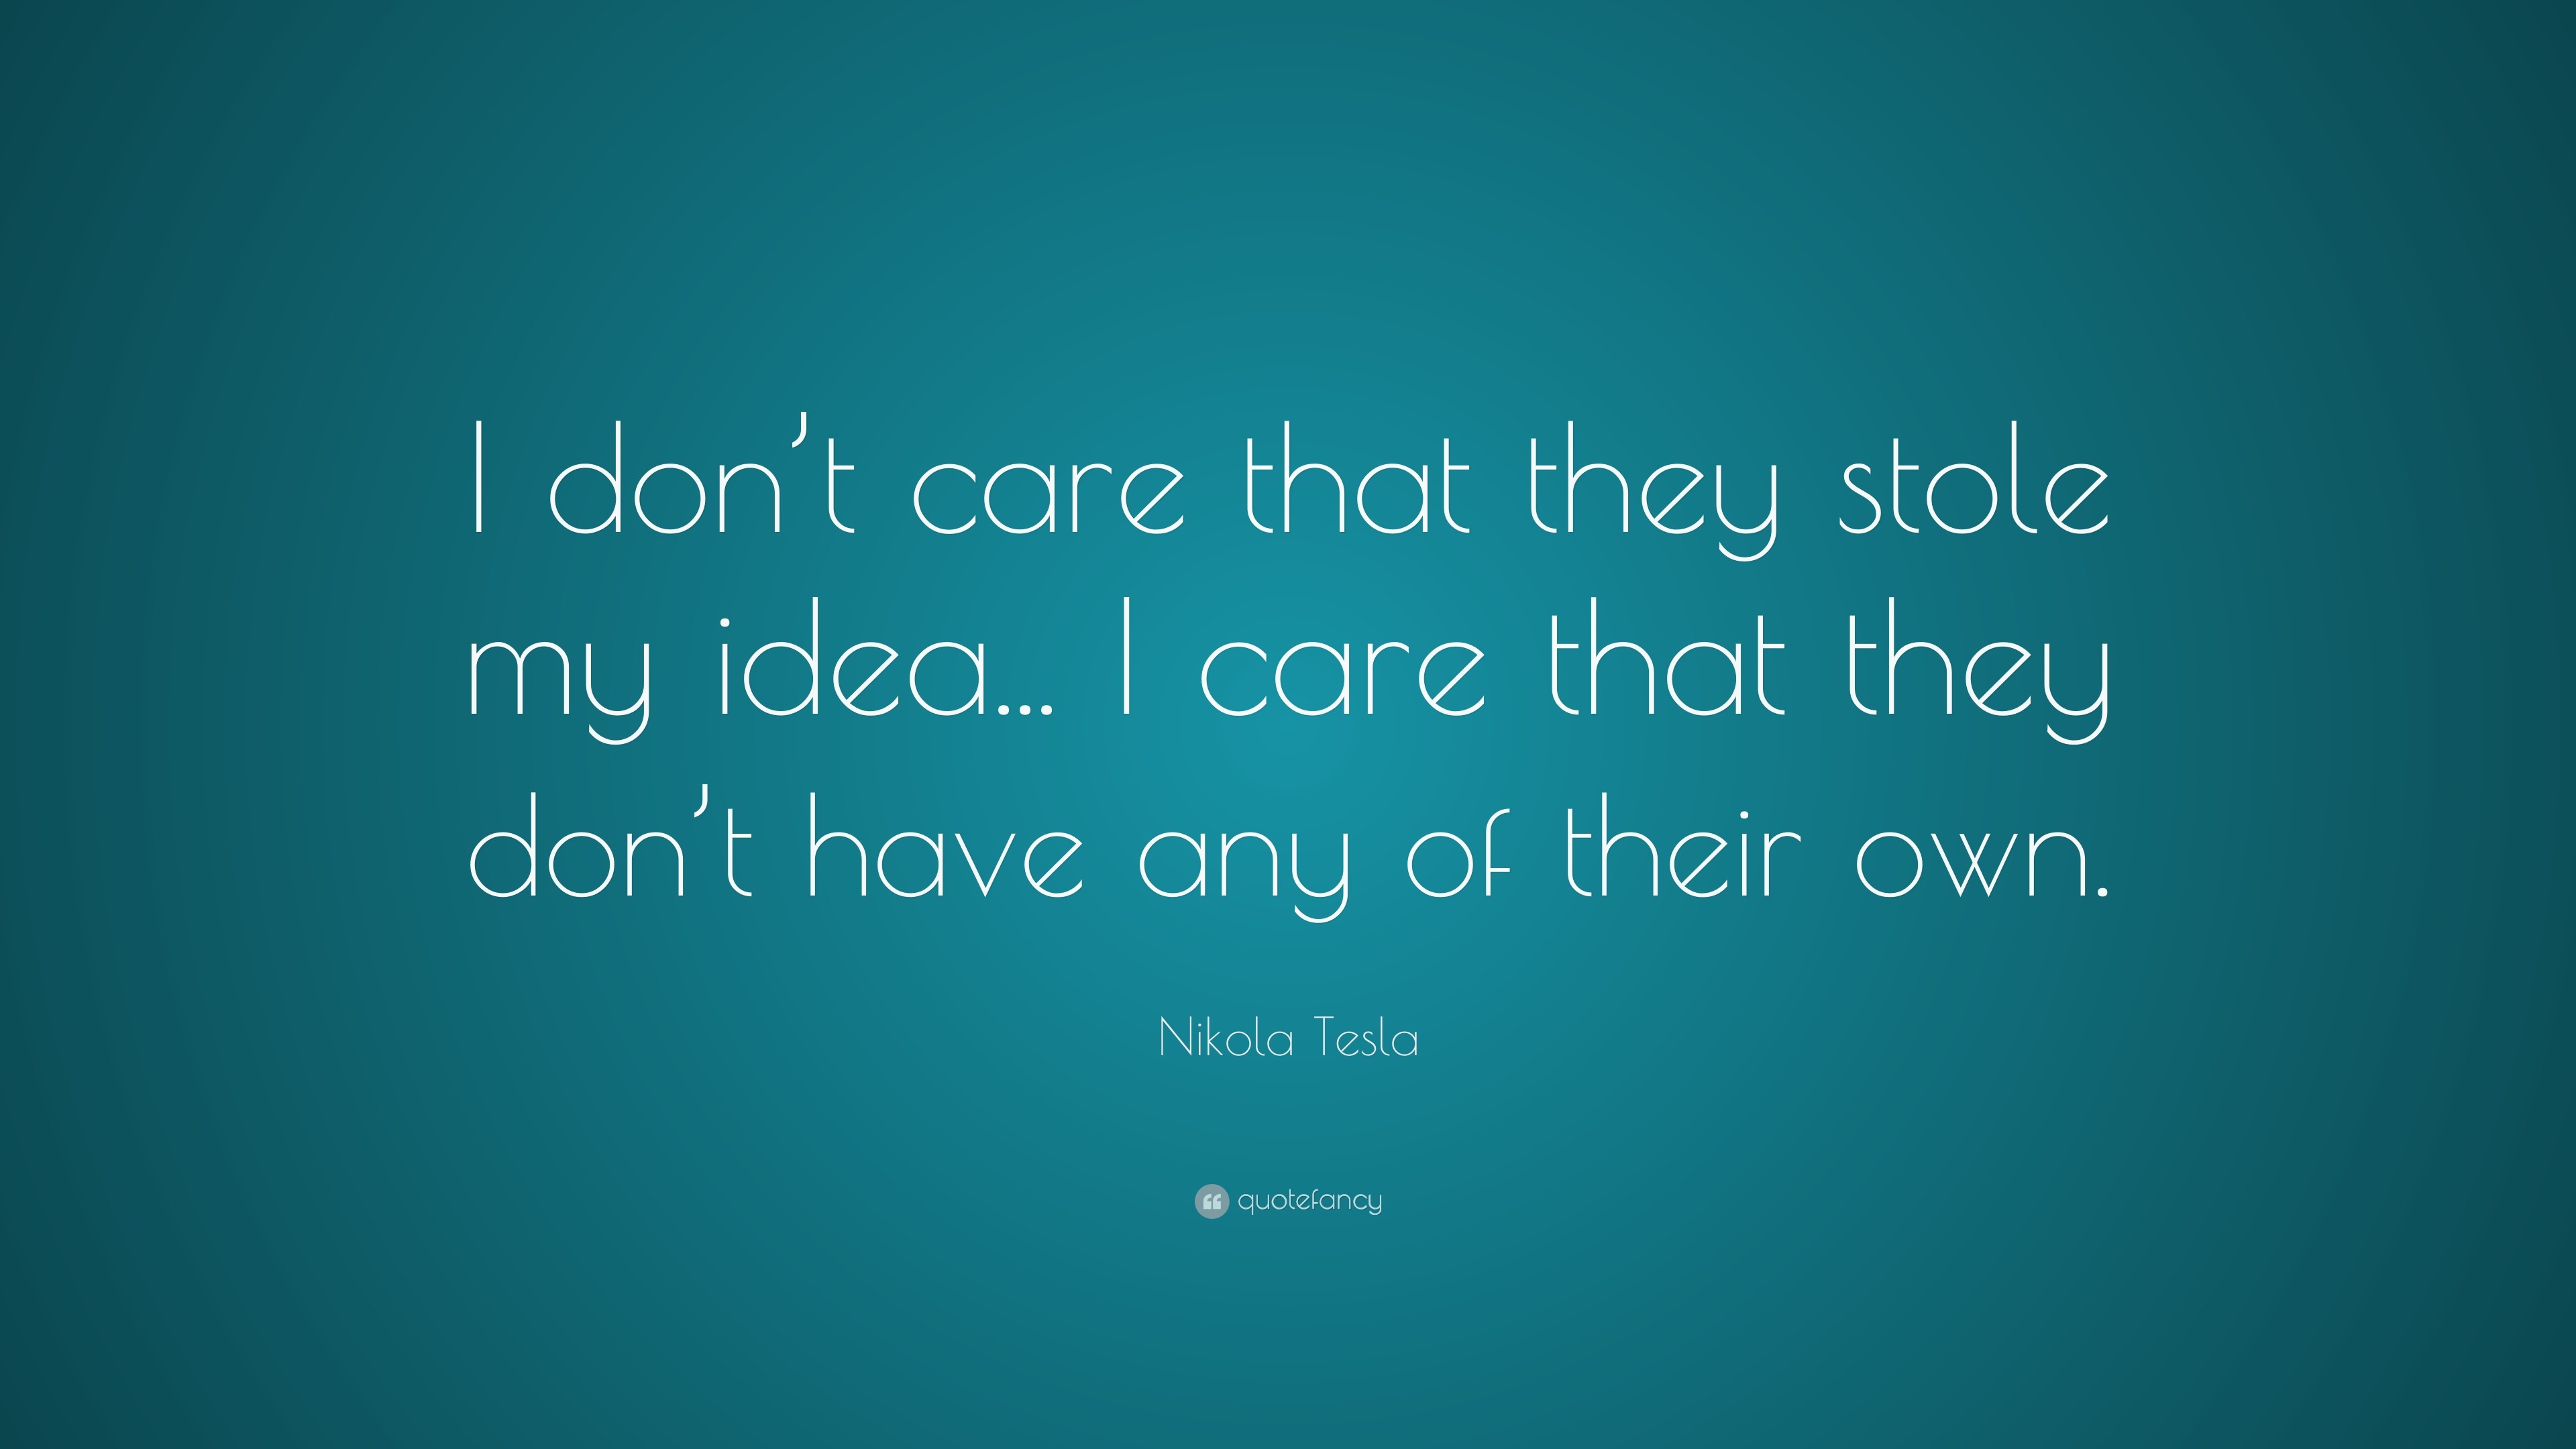 3840x2160 Nikola Tesla Quote: “I don't care that they stole my idea.